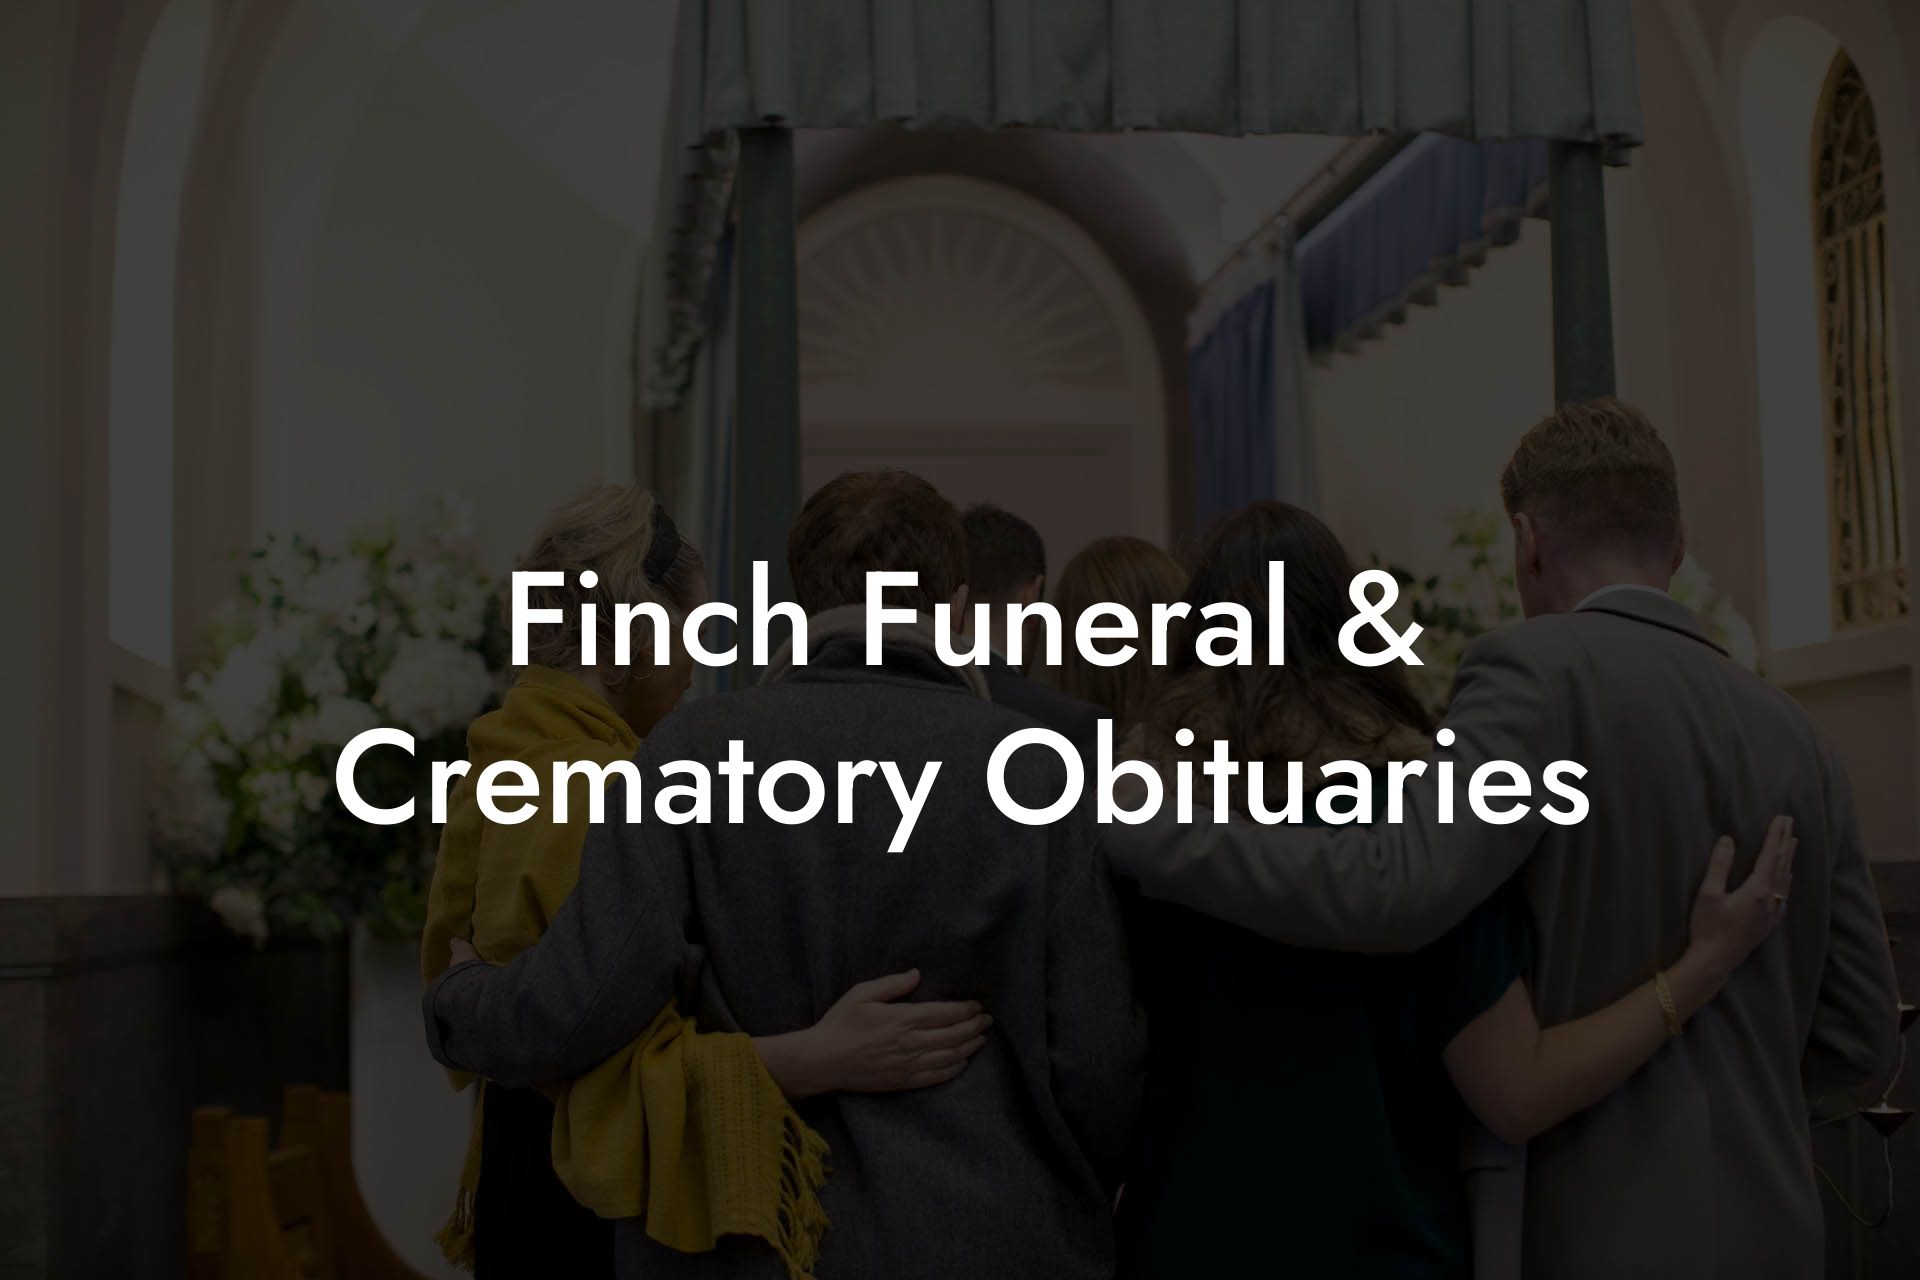 Finch Funeral & Crematory Obituaries